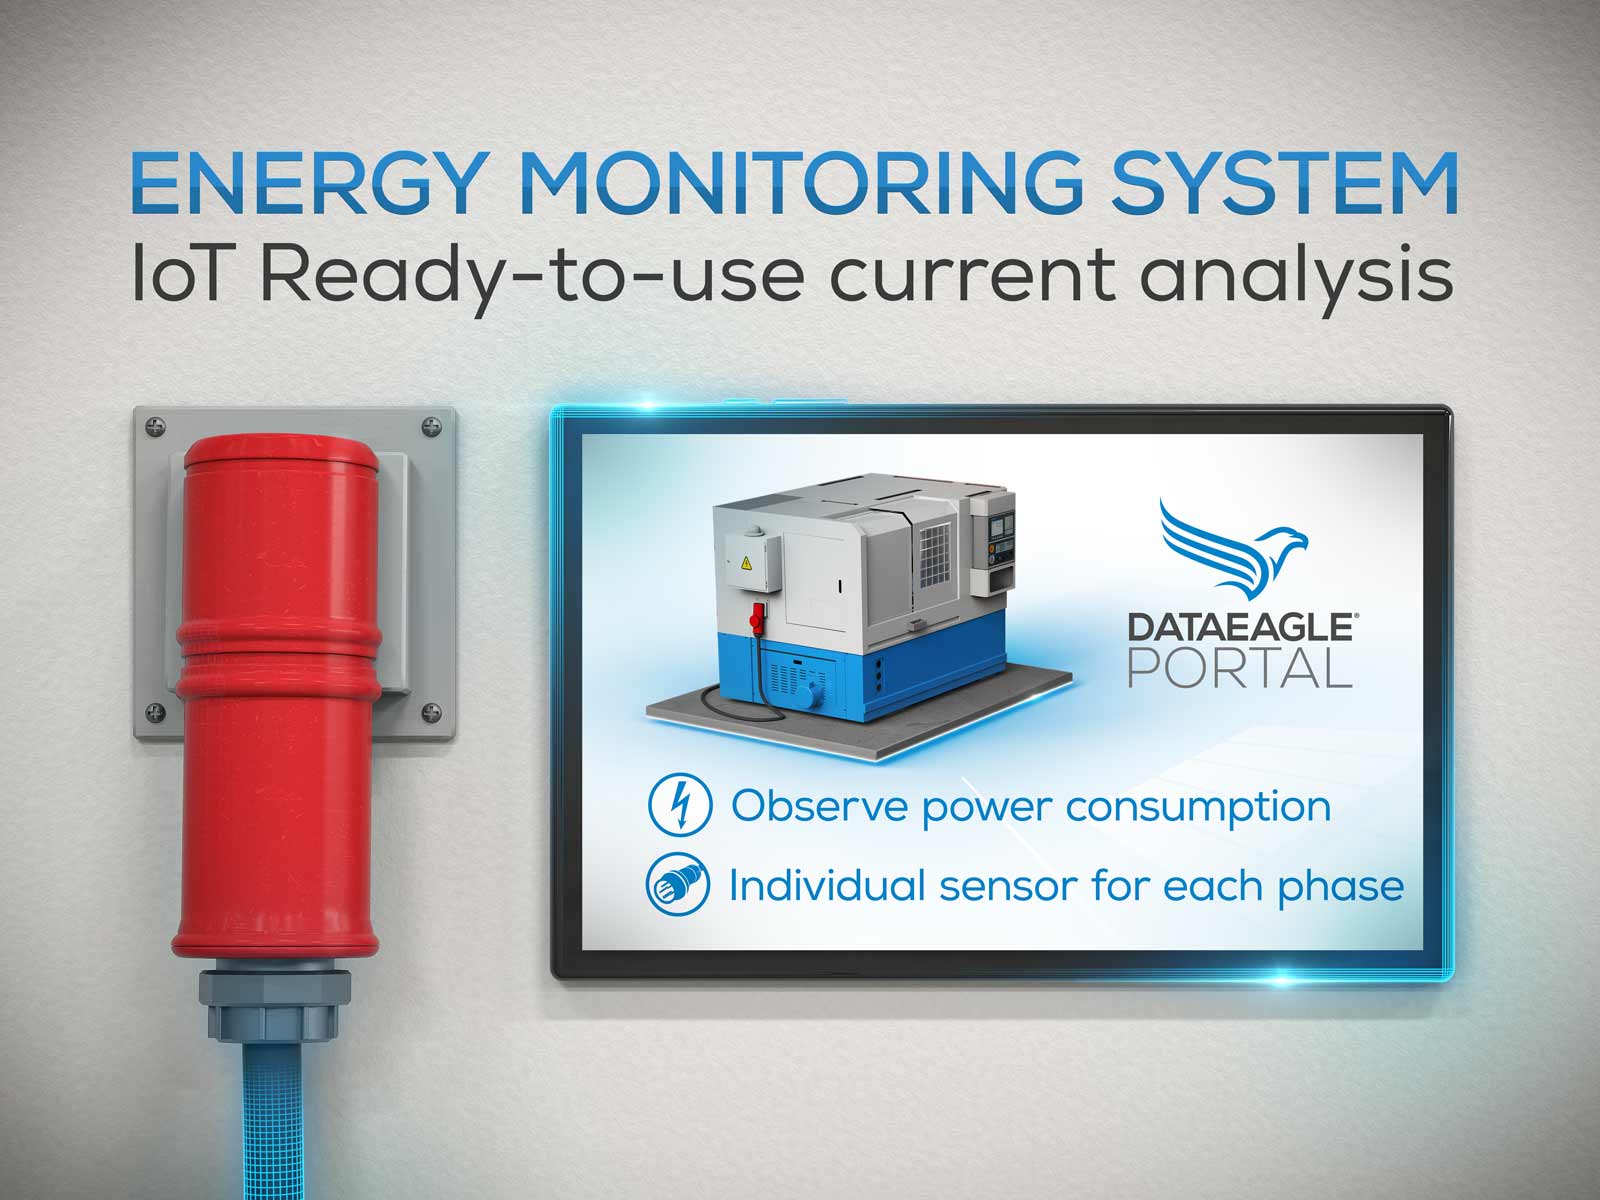 Energy Monitoring System - Condition Monitoring System - IoT Ready-to-use by Schildknecht AG